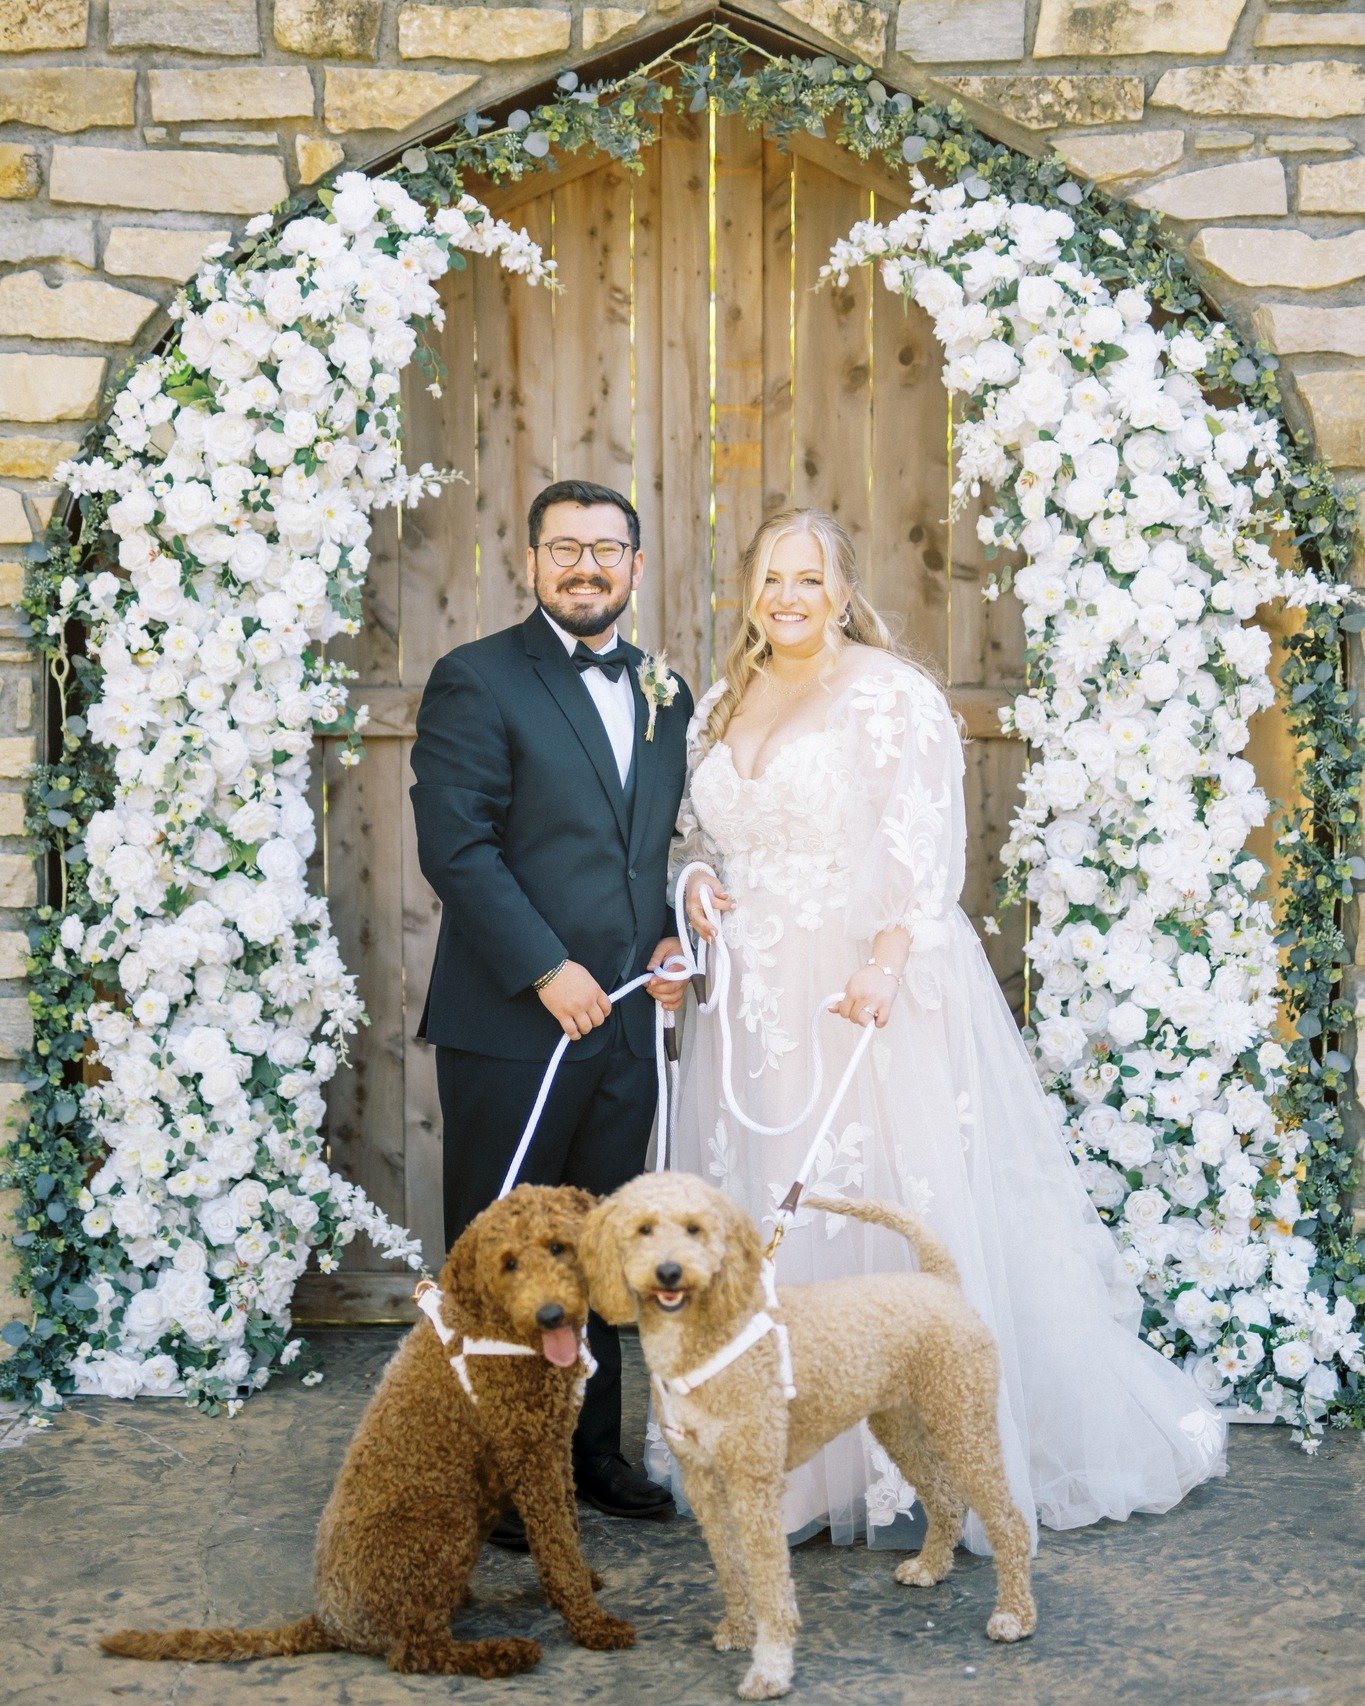 An incredible day as these lovebirds said &quot;I do&quot; with their adorable pups by their side.🐶 What a beautiful journey you're embarking on.❤️ Here's to a lifetime of shared dreams and walks in the park!💍🐾

🌟Wedding Vendors🌟
Wedding Photogr